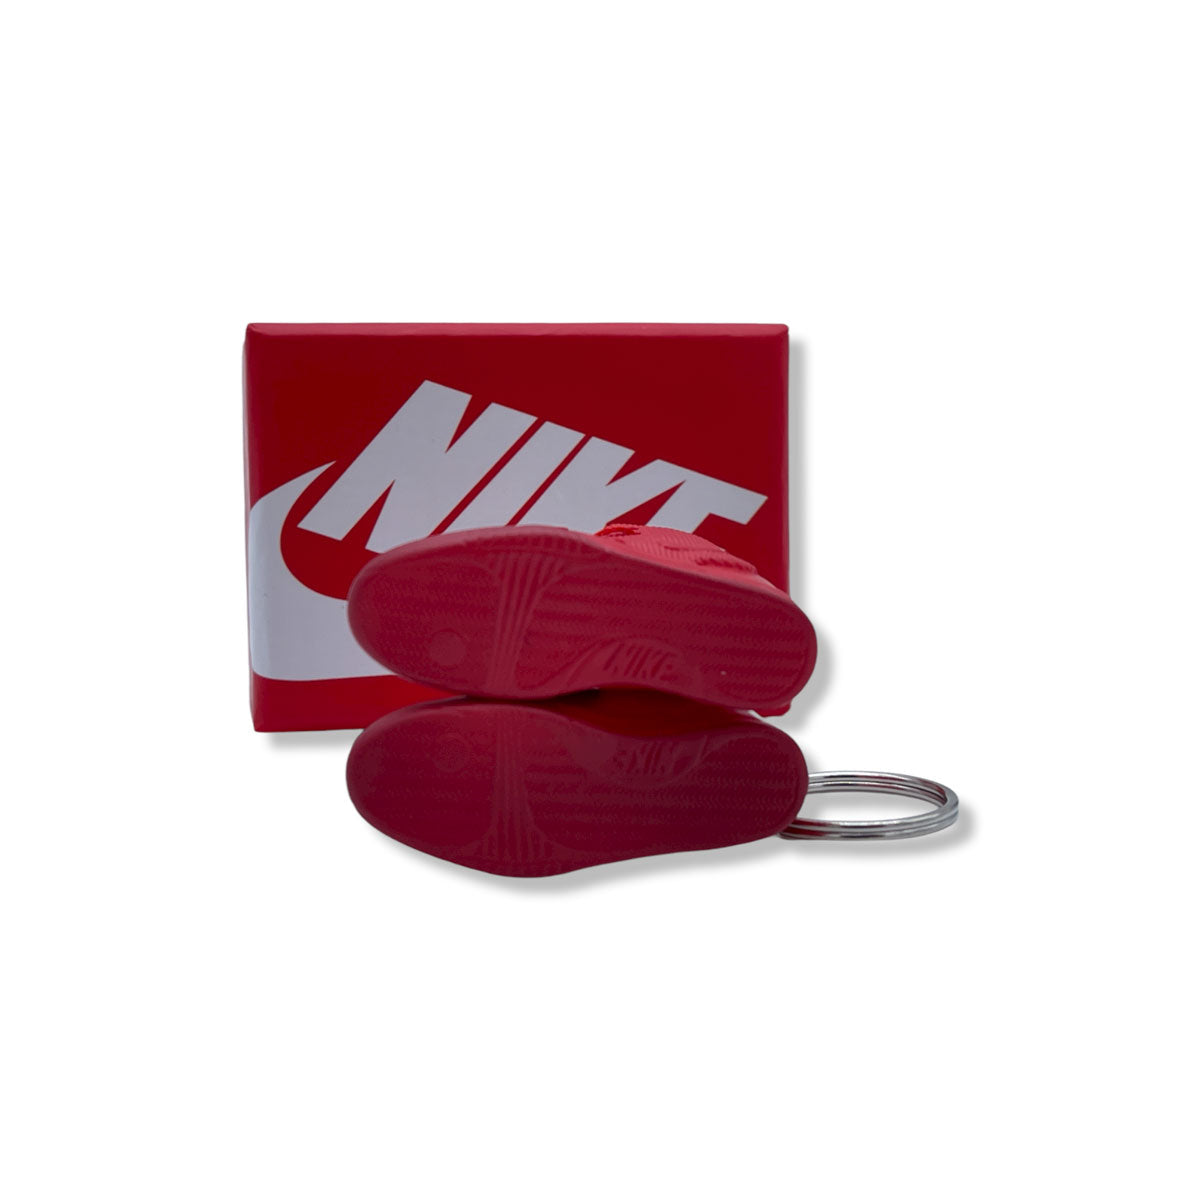 3D Sneaker Keychain- Nike Air Yeezy 2 Red October Pair - KickzStore